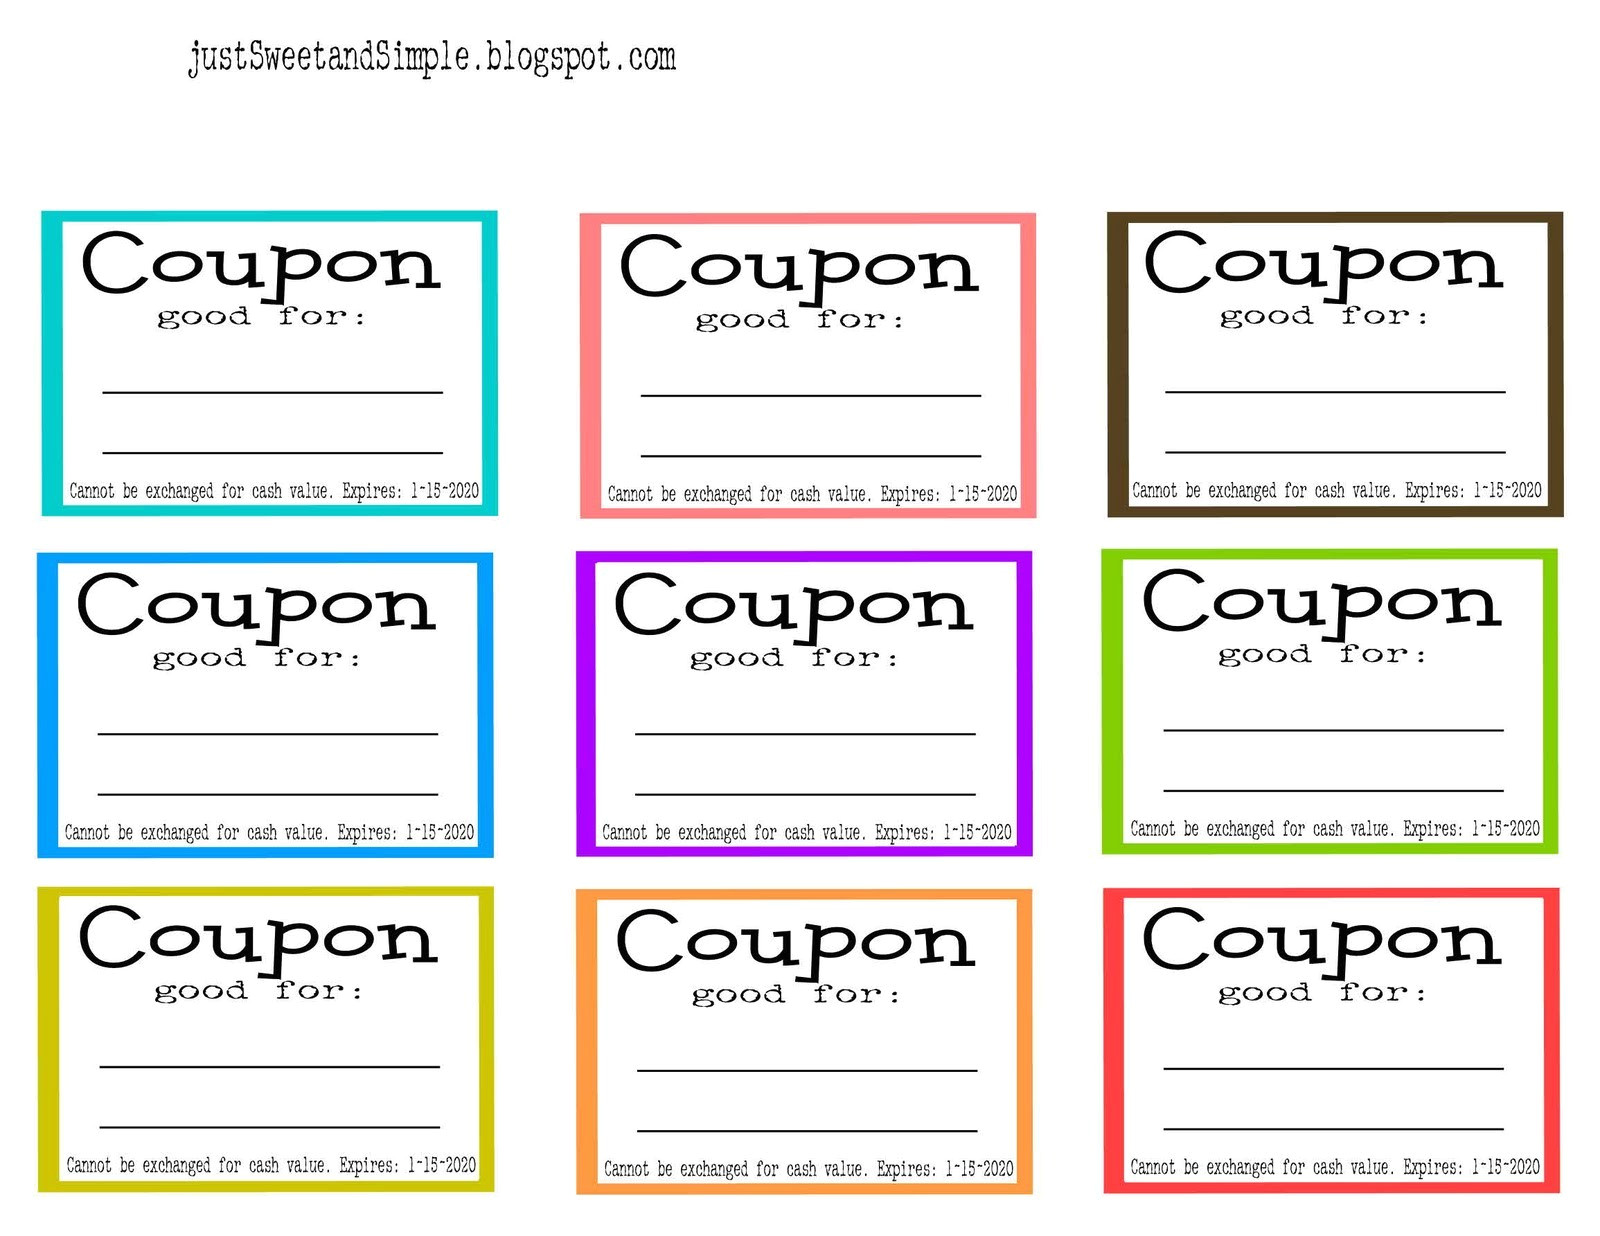 custom coupons free template elegant create your own coupon rio ferdinands